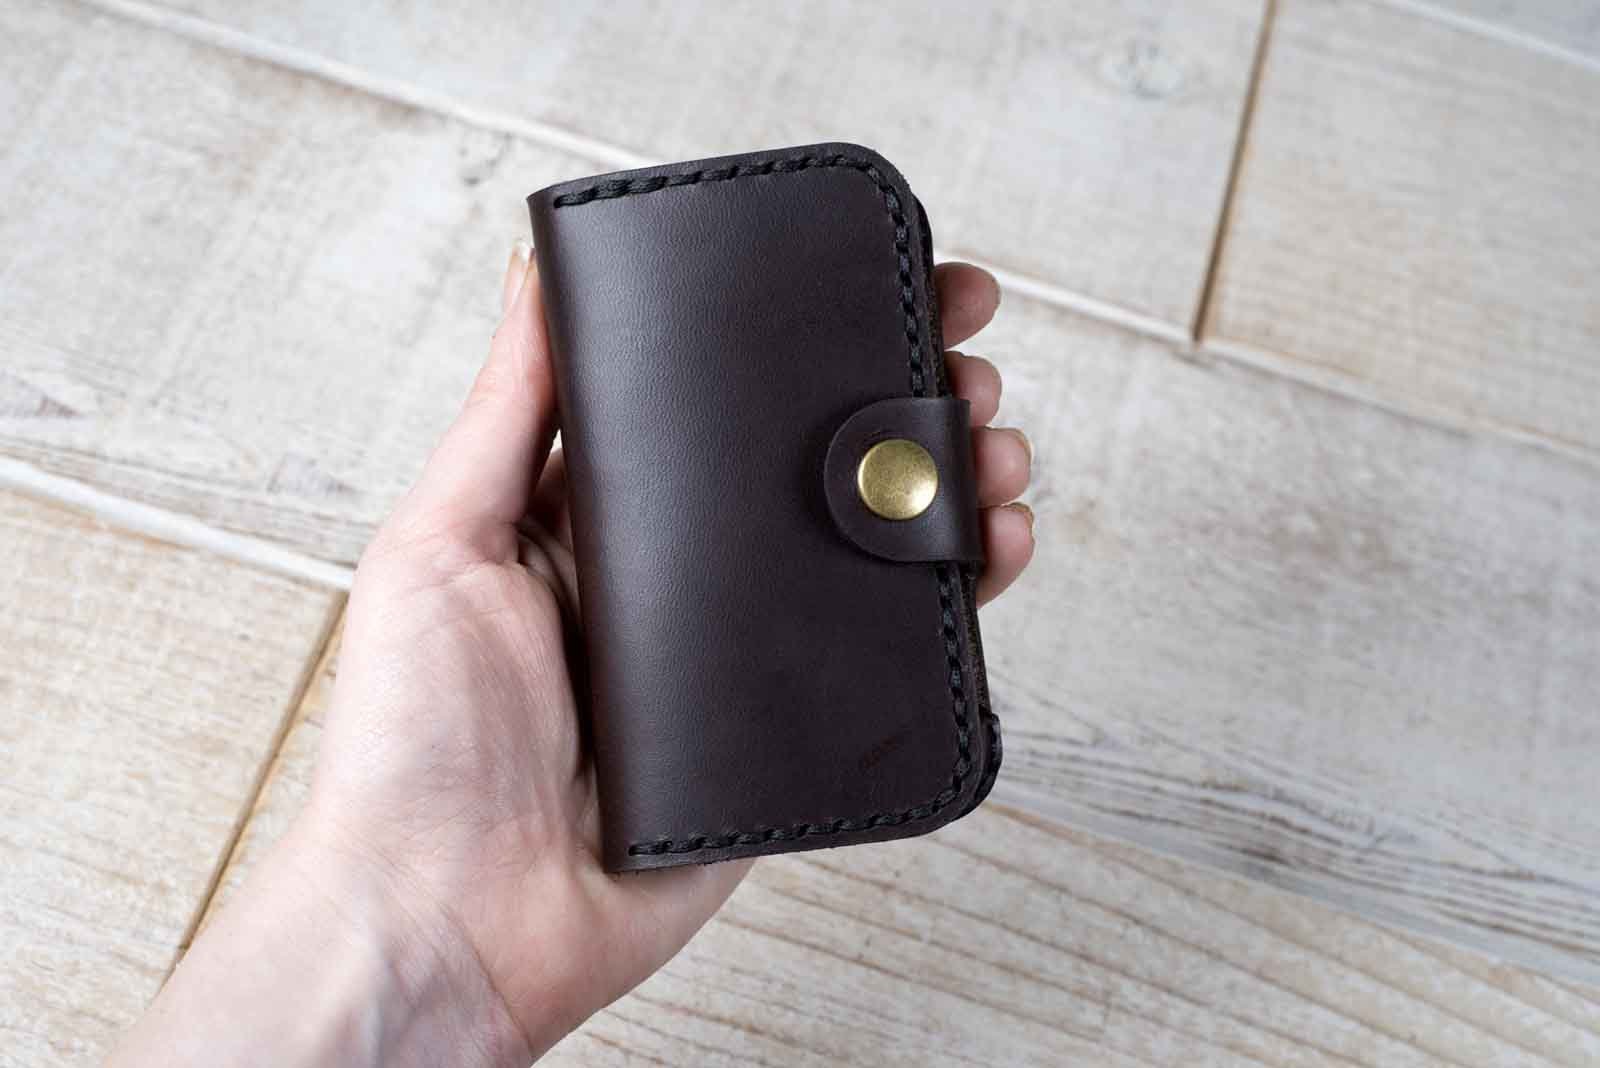 Long Leather Crossbody Phone Pocket - Fits All iPhone Models, Samsung Galaxy S6 Edge+ / Note5 - Black Onyx - Personalized Holiday Gifts, Leatherology